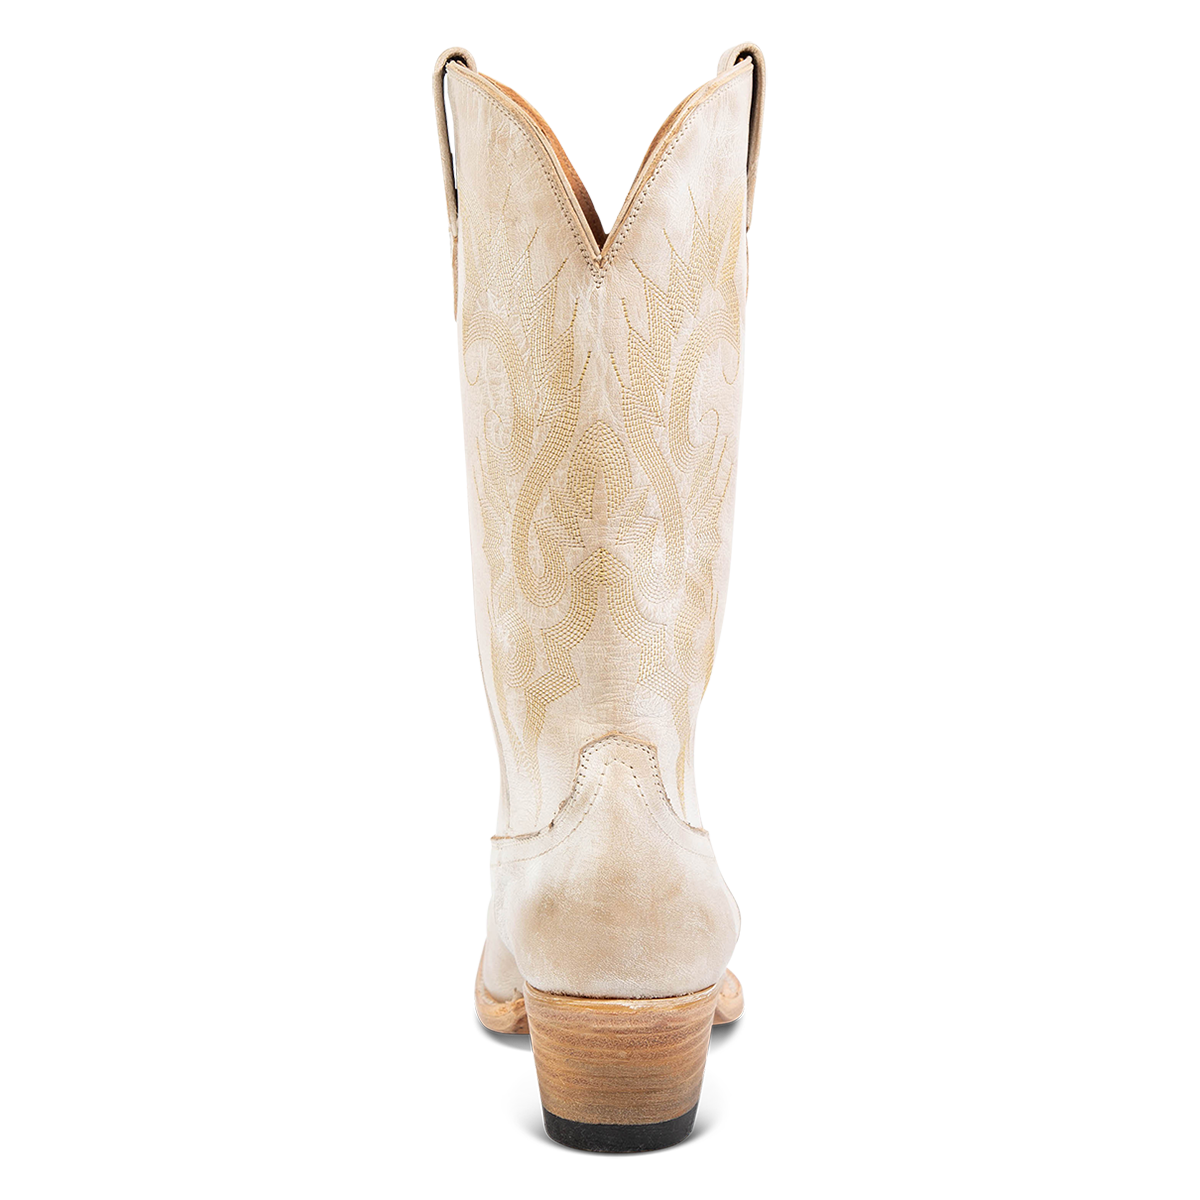 Back view showing FREEBIRD women's Woody beige leather boot with stitch detailing and low slanted heel